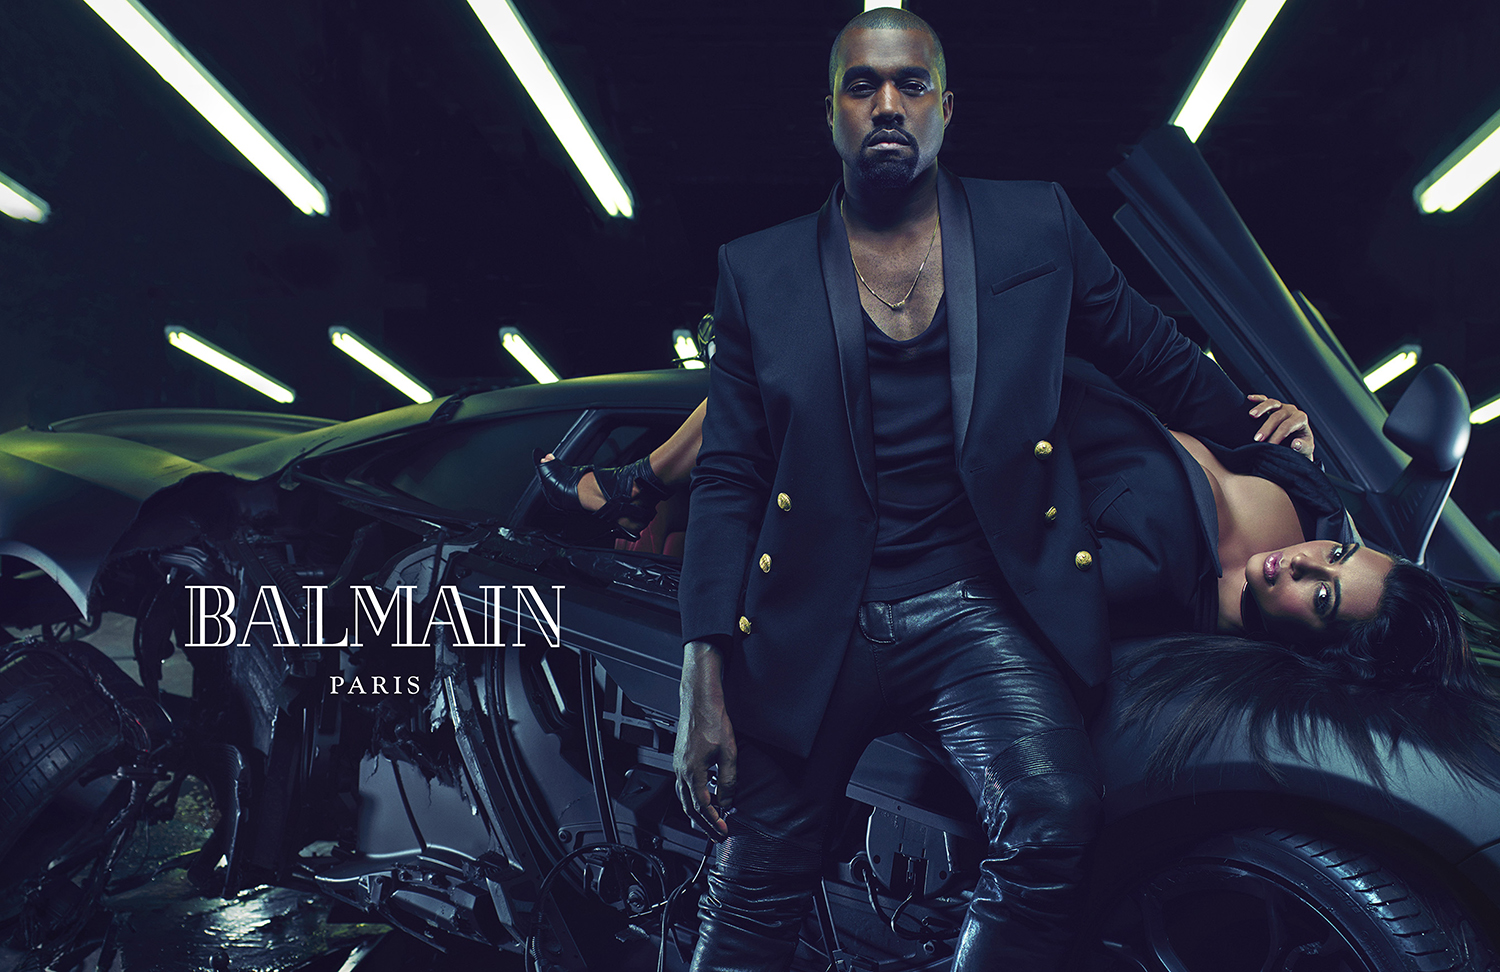 Kim And Kanye Are The New Faces Of Balmain Menswear - Daily Front Row